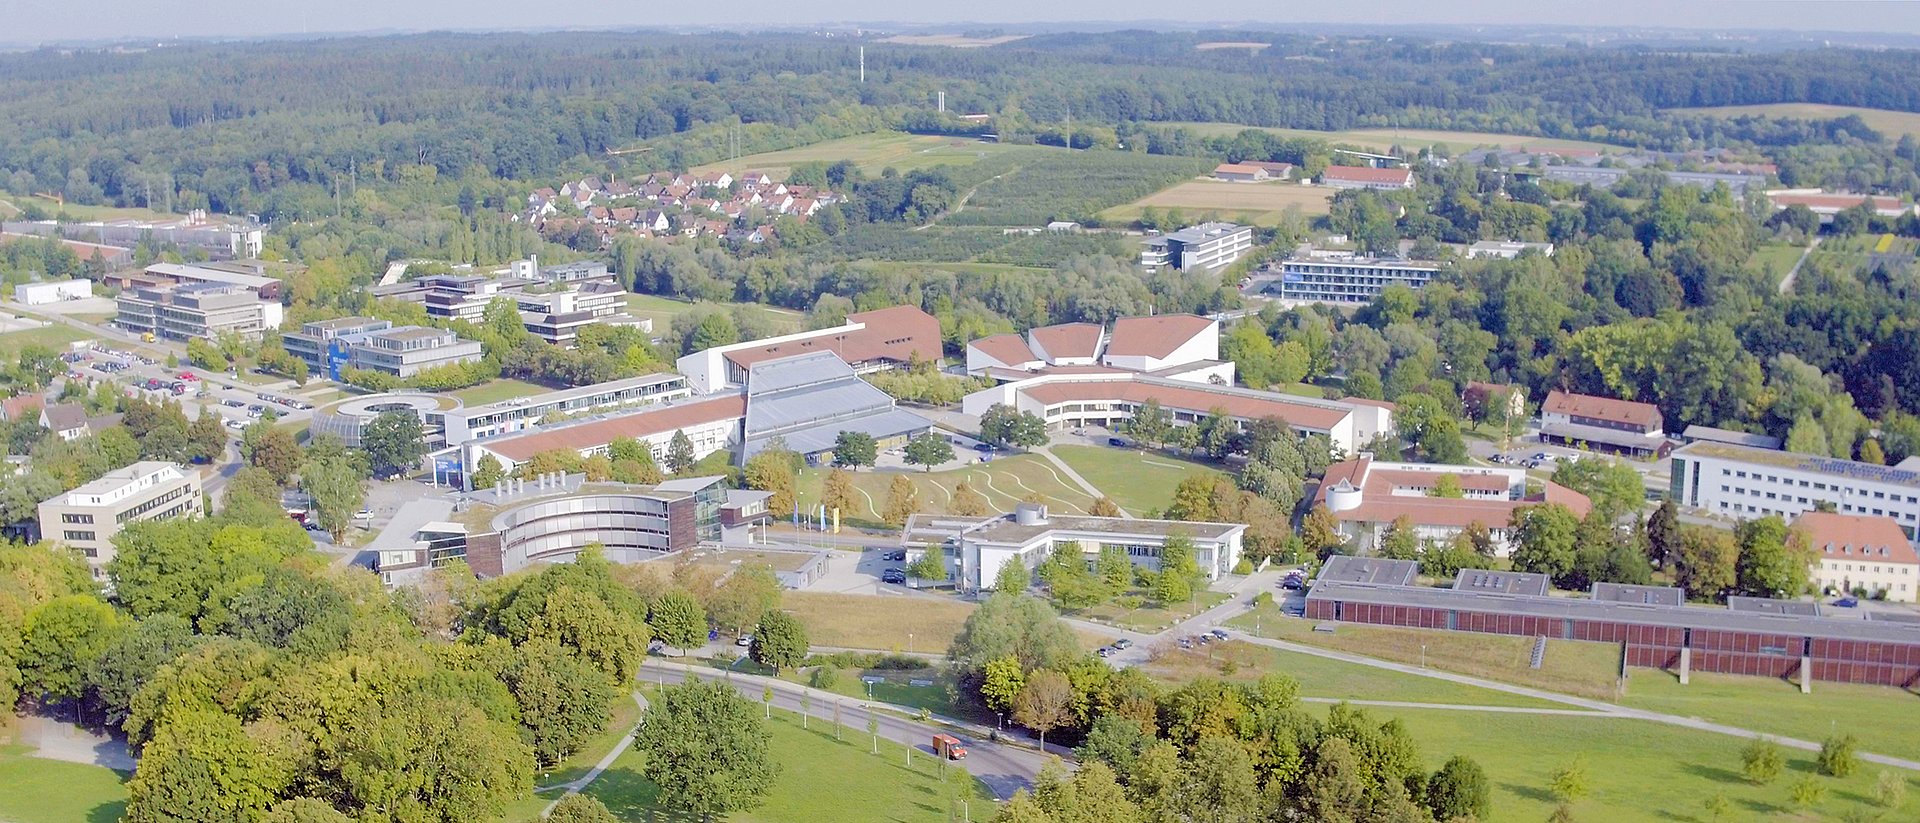 Aerial view of the Weihenstephan Campus, where the new building will be errected.